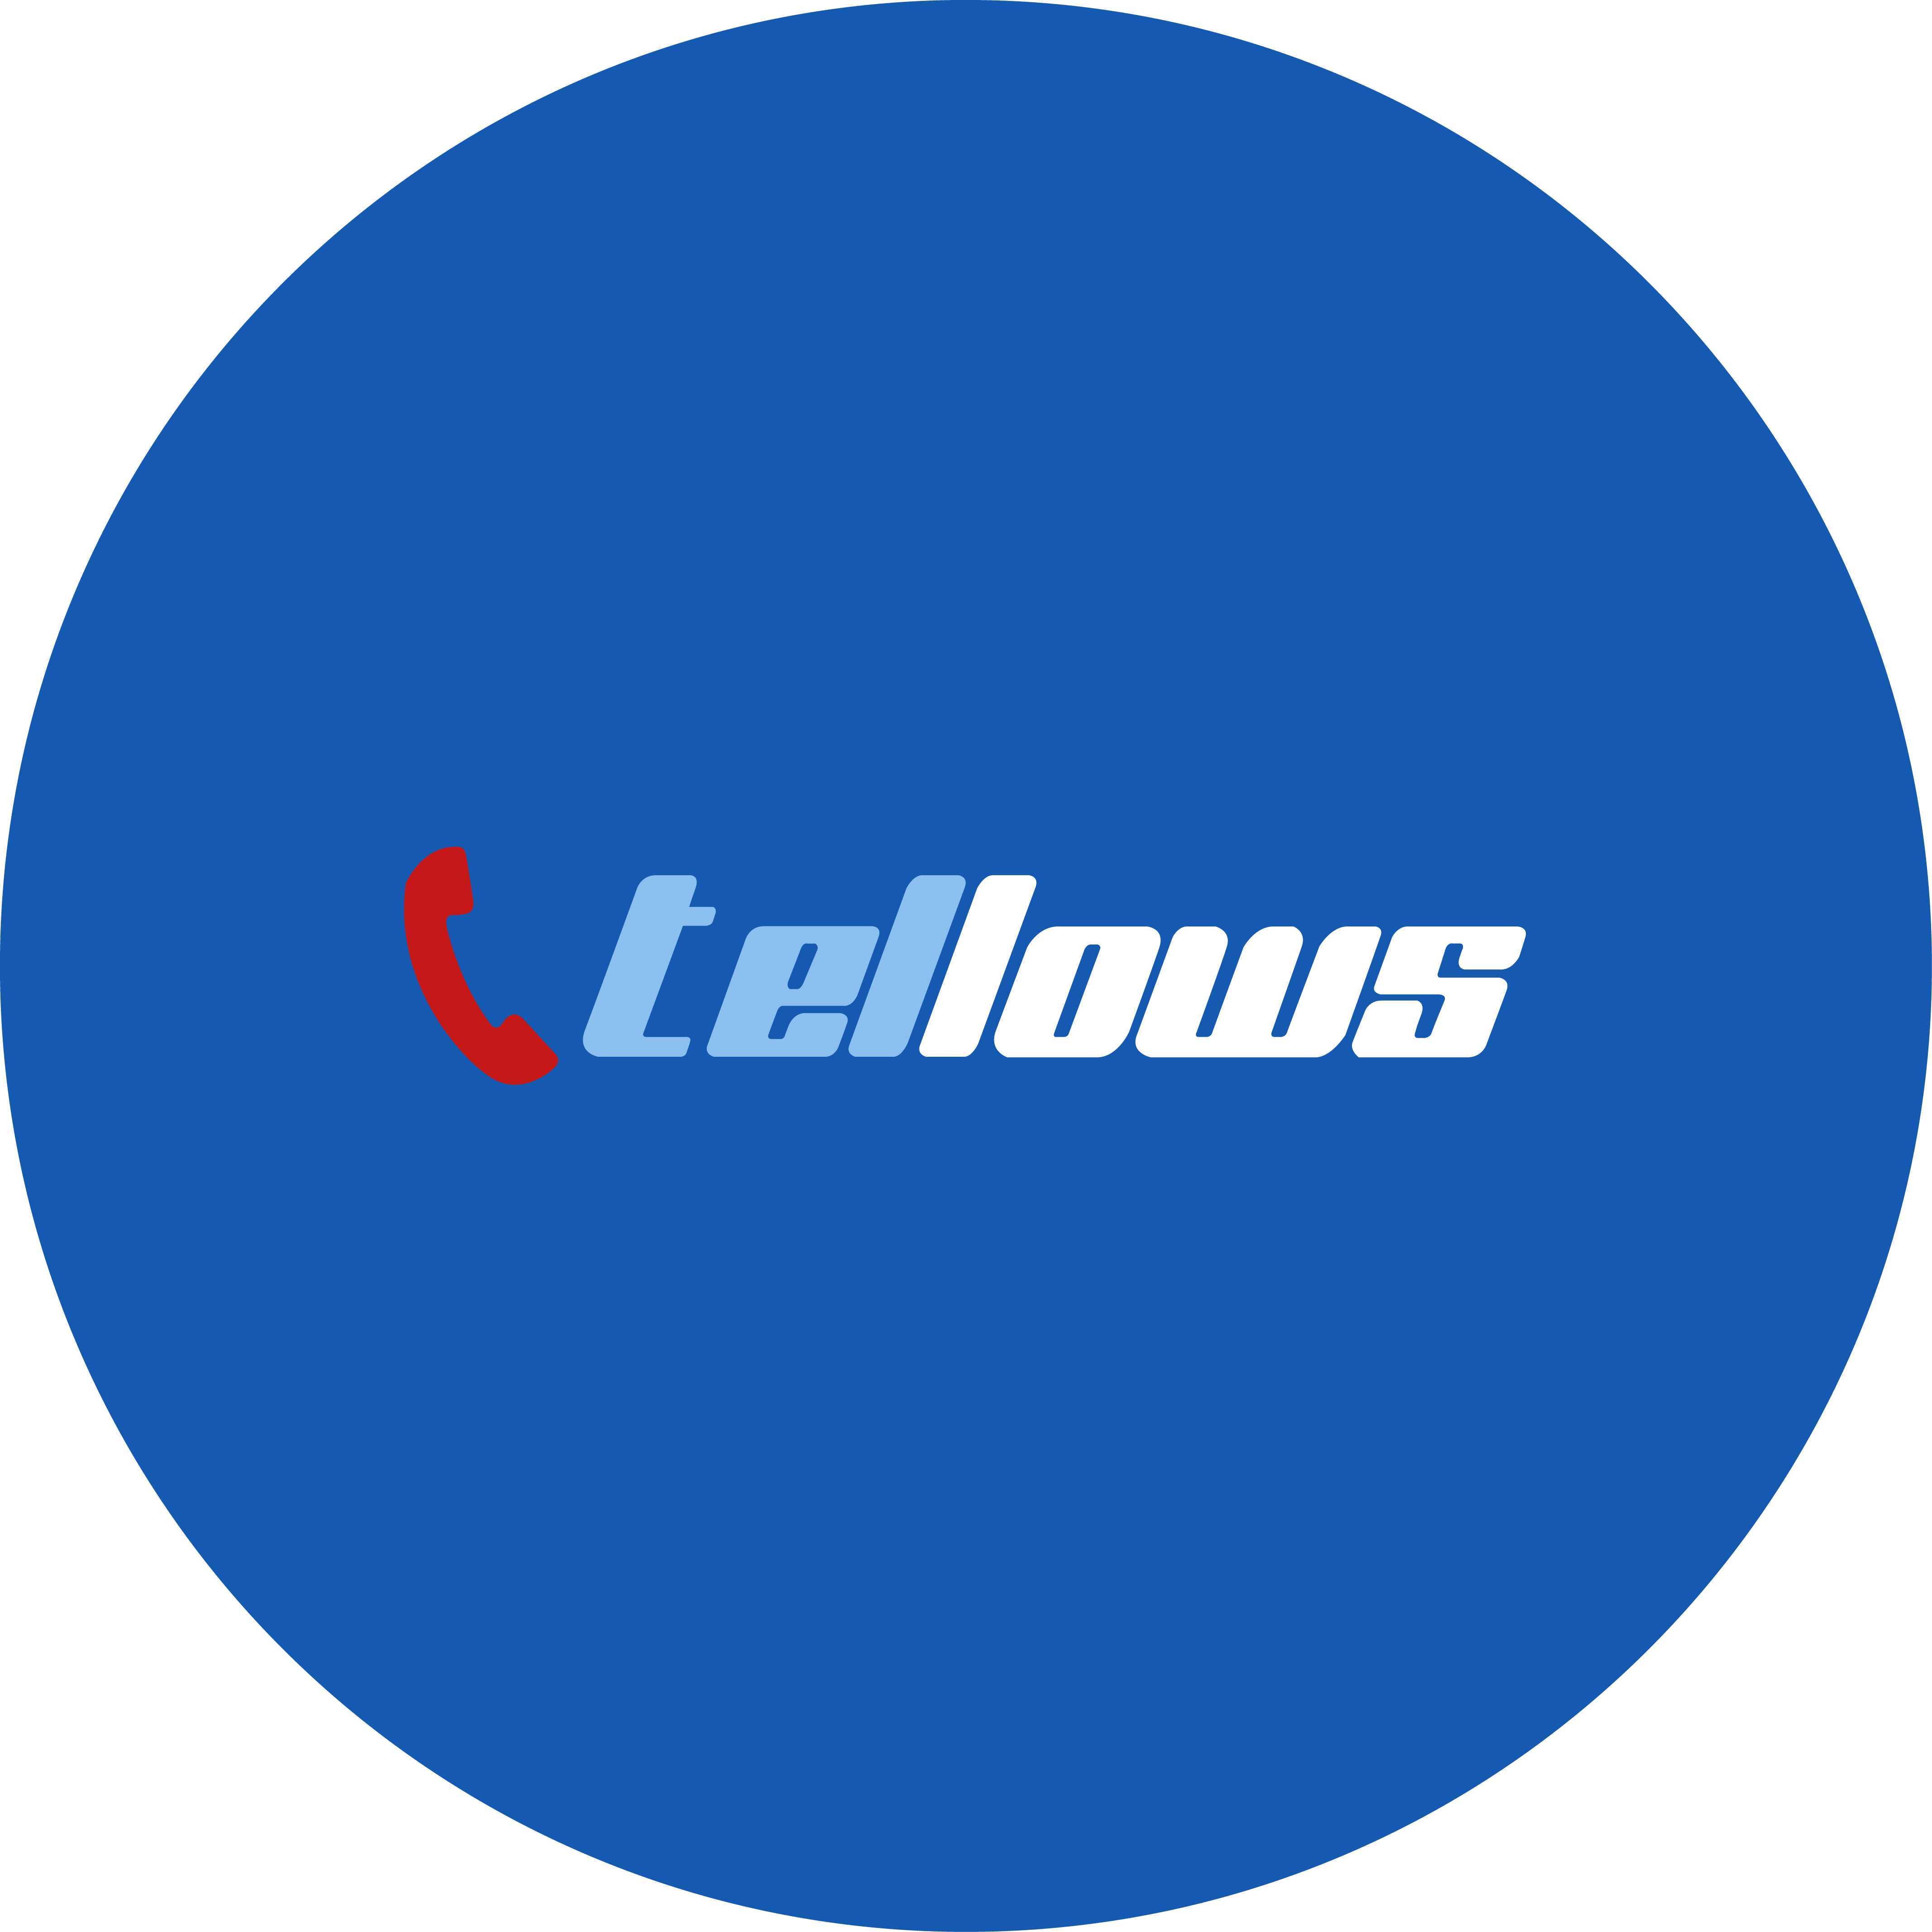 24 Hour Towing - tellows